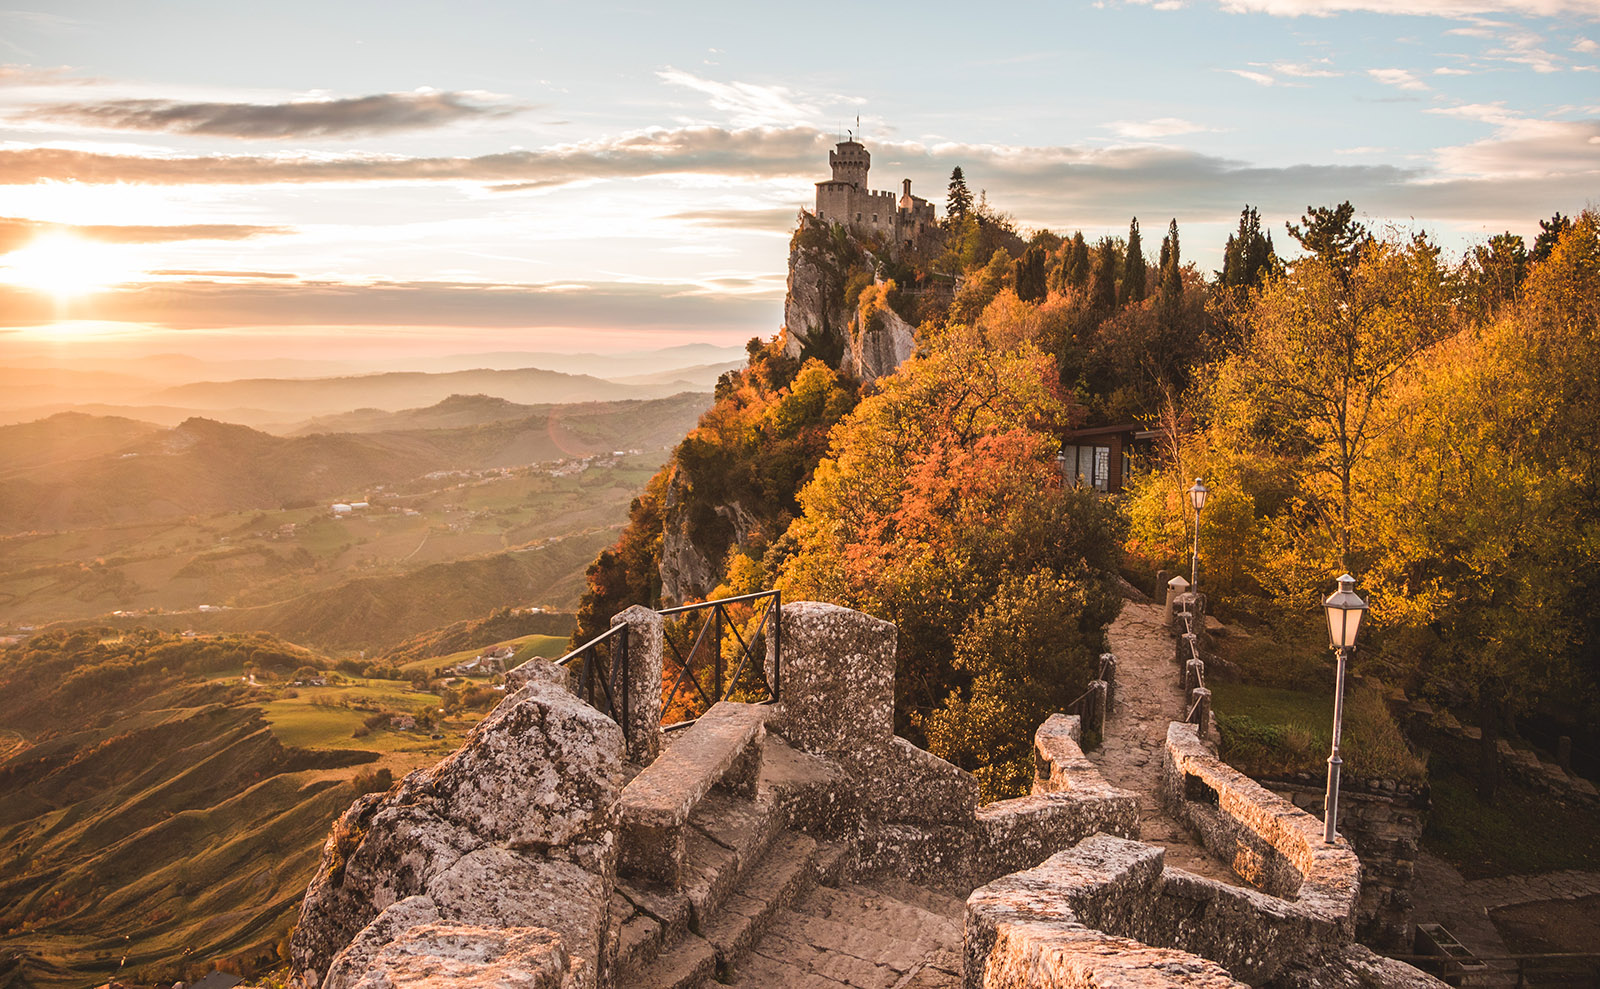  castle on a hill in san marino overlooking the forest